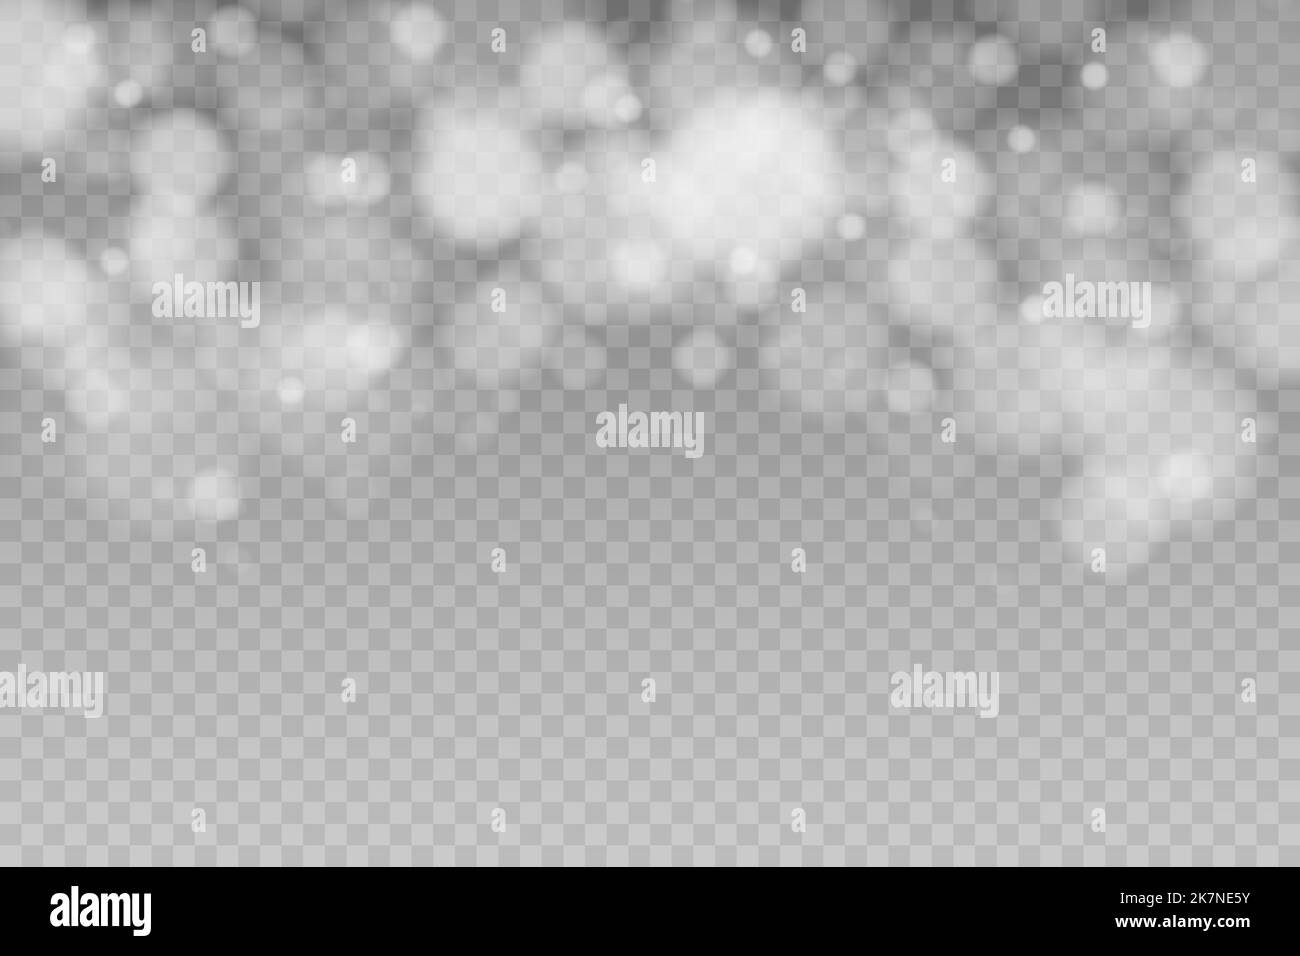 Shining bokeh isolated on transparent background. Light isolated lights. Transparent blurry shapes. Abstract light effect. Vector illustration. Stock Vector